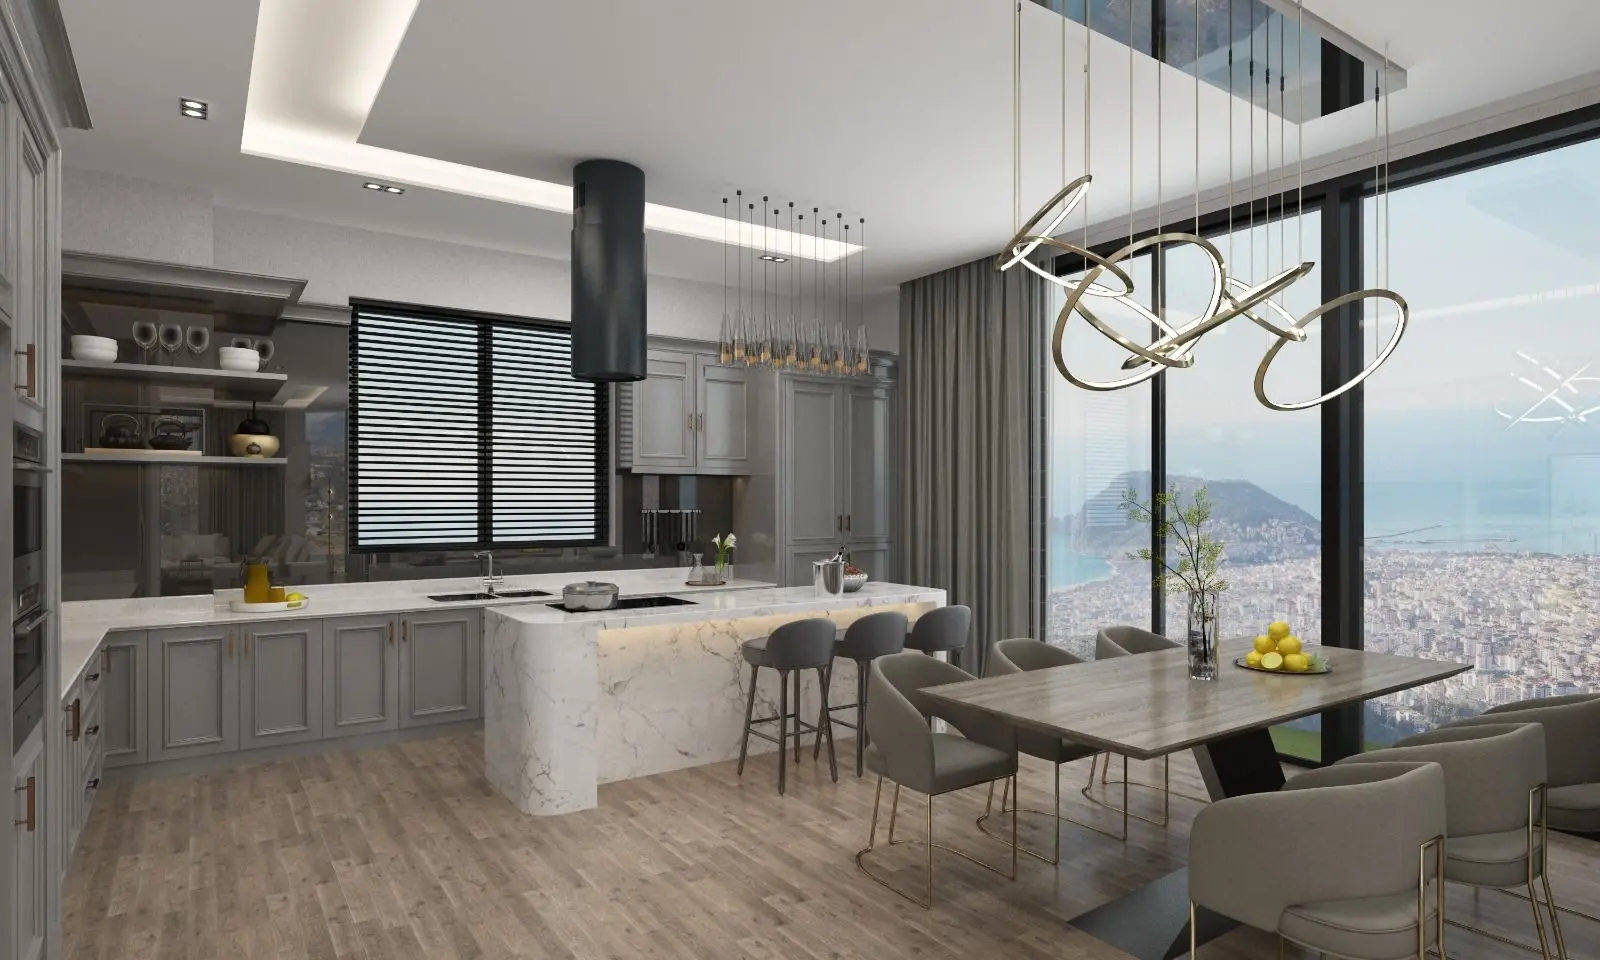 LUXURIOUS VILLA PROJECT WITH MAGNIFICENT VIEW IN ALANYA